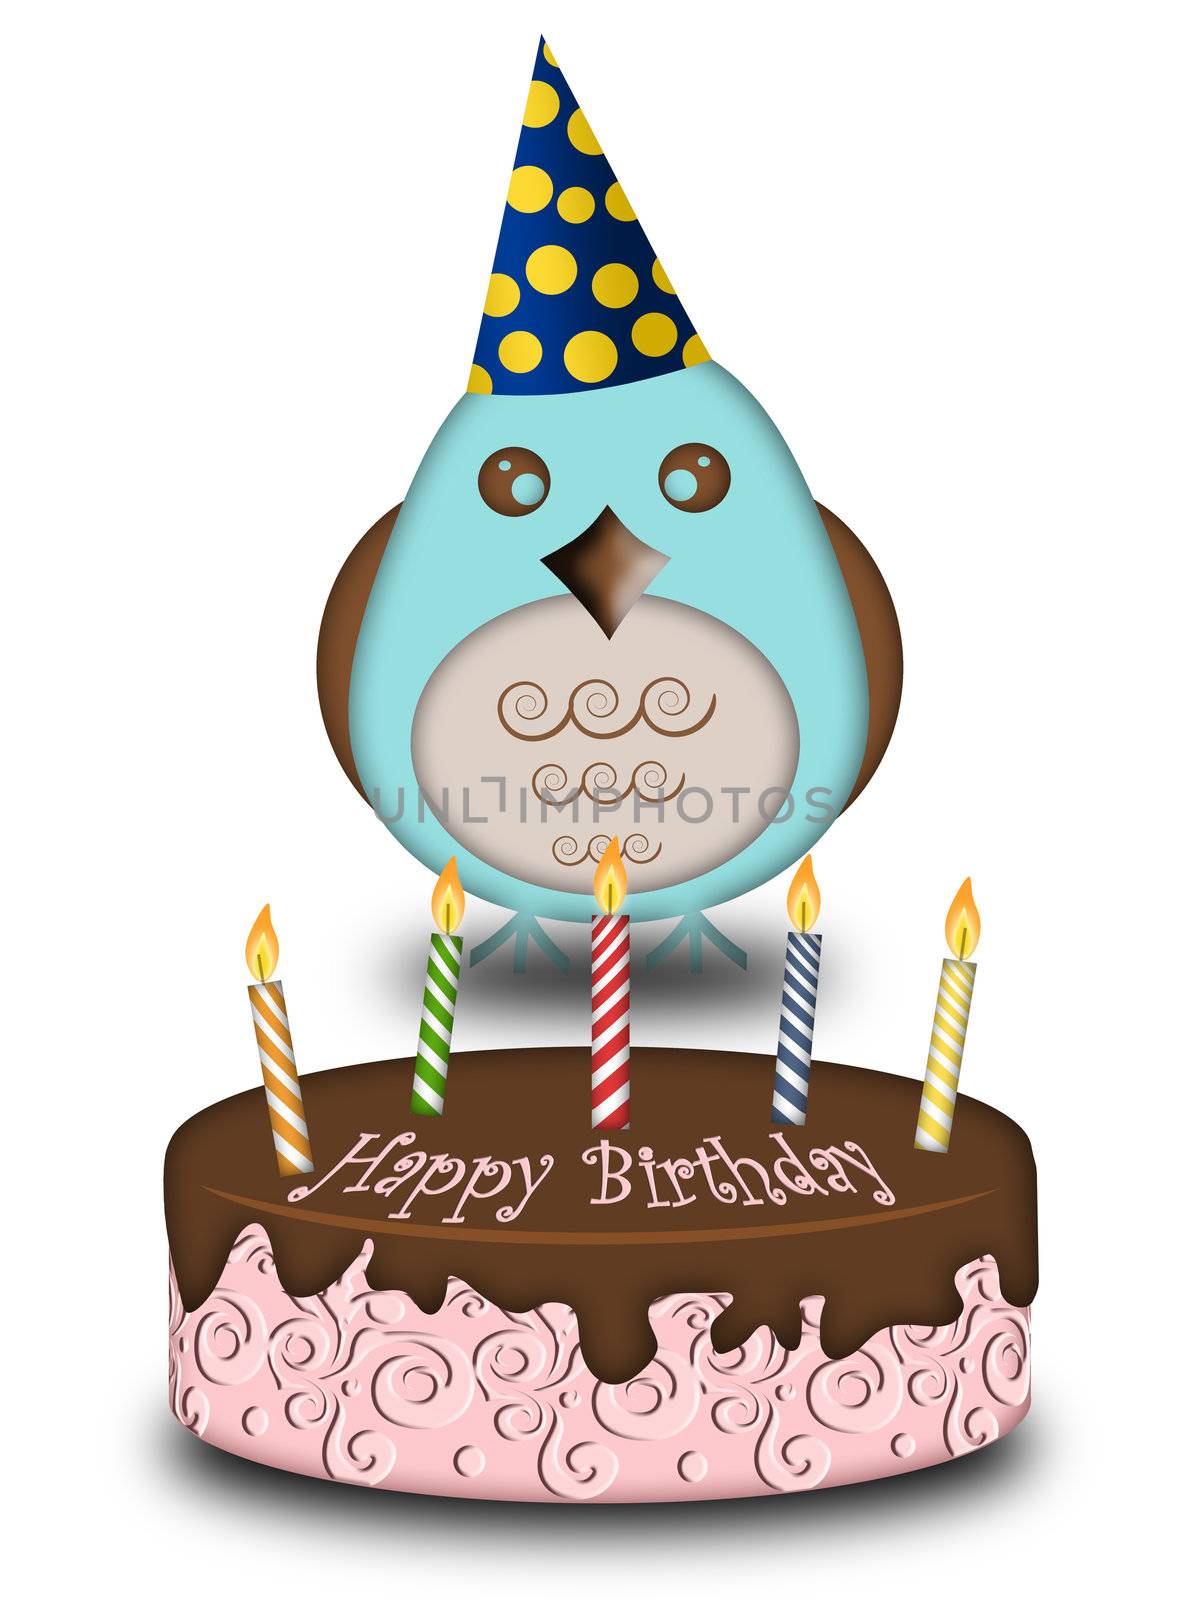 Happy Birthday Blue Bird with Cake Candles Cone Hat Illustration